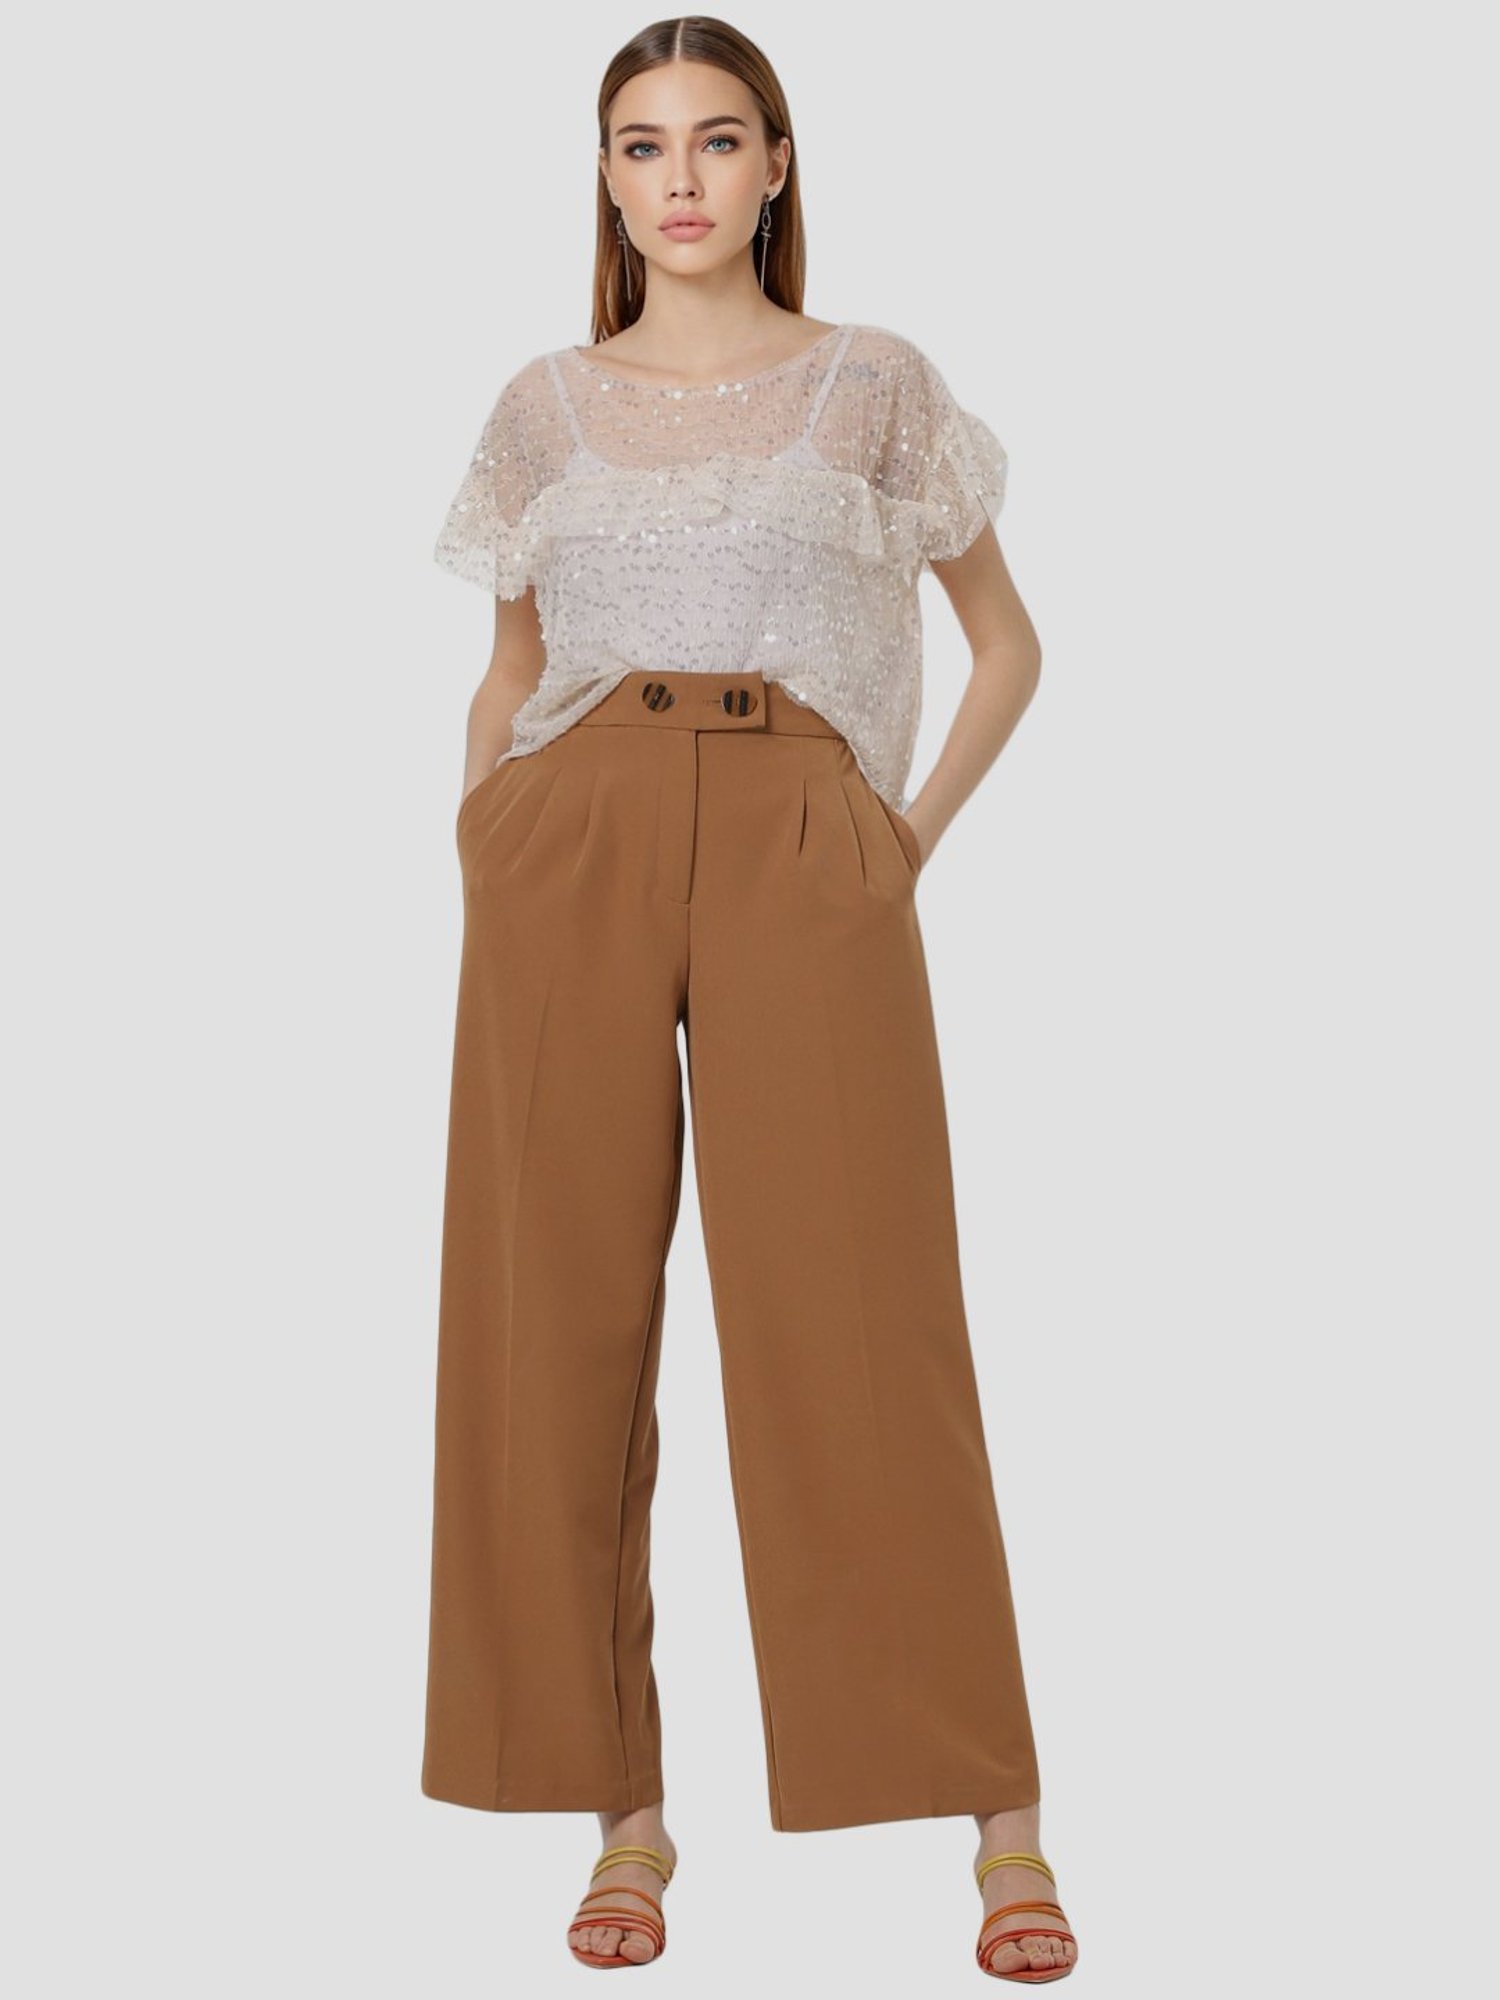 Flounce London Petite basic high waisted wide leg trousers in chocolate  brown  ASOS